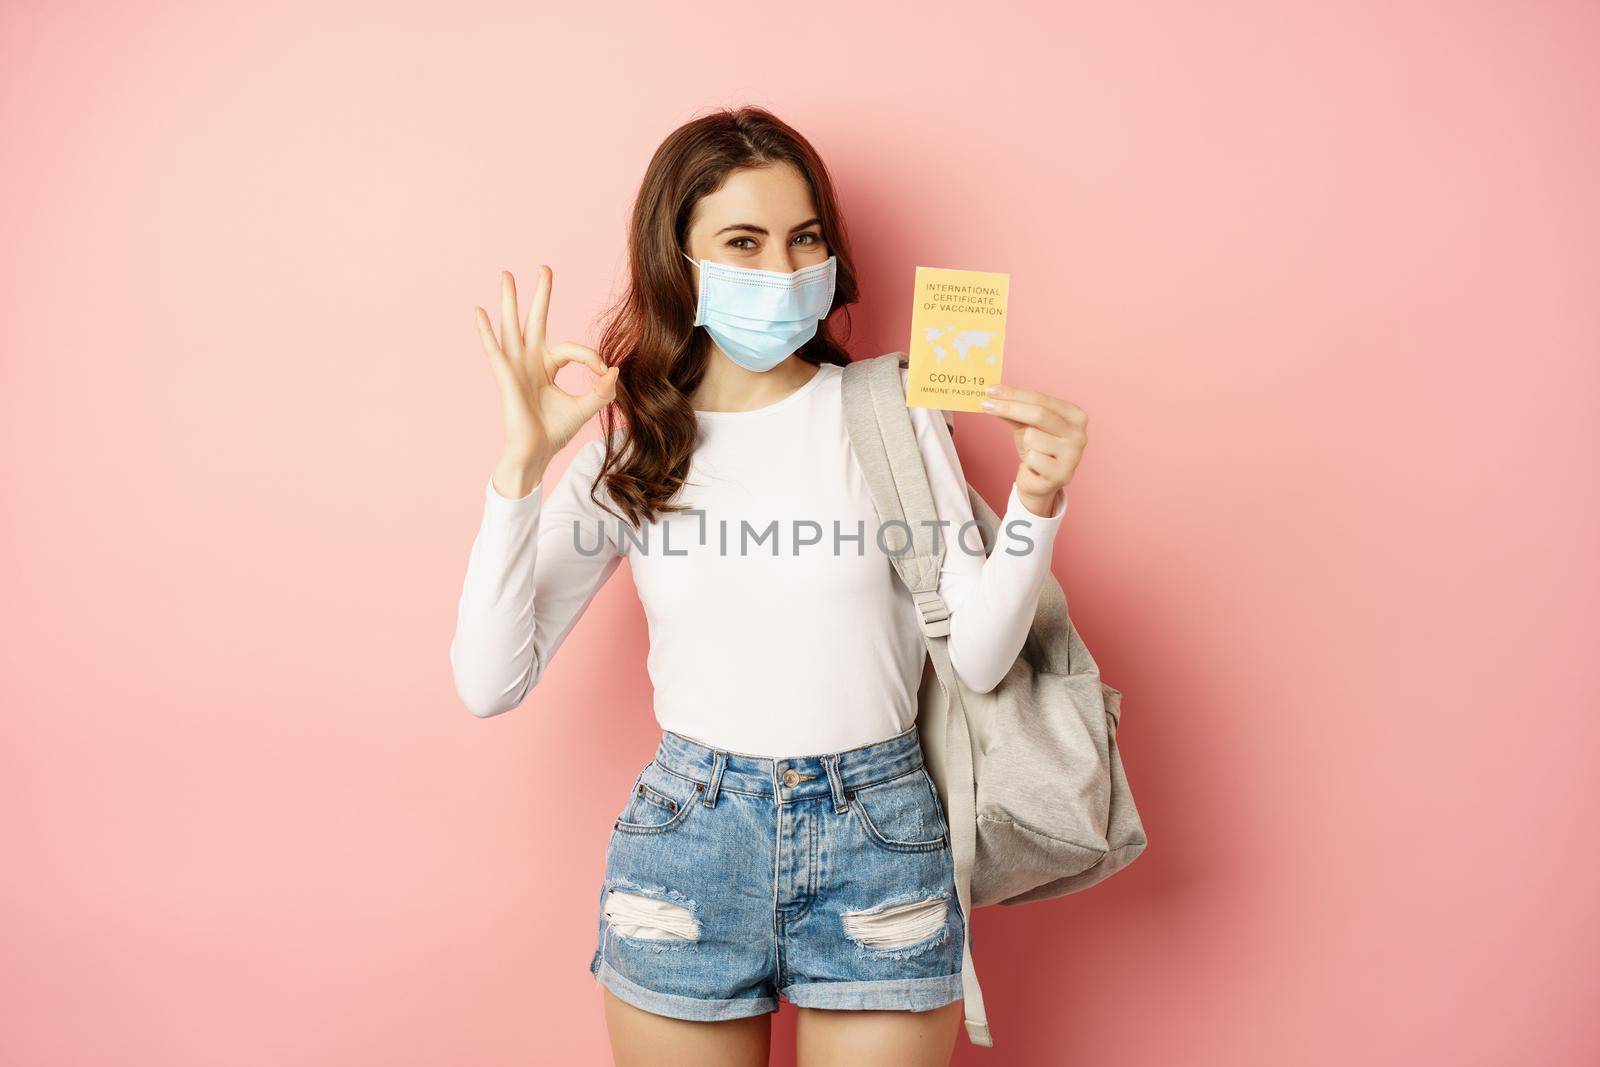 Young woman in medical mask, showing okay sign and covid vaccination certificate, travel during pandemic, going on holiday, standing over pink background.